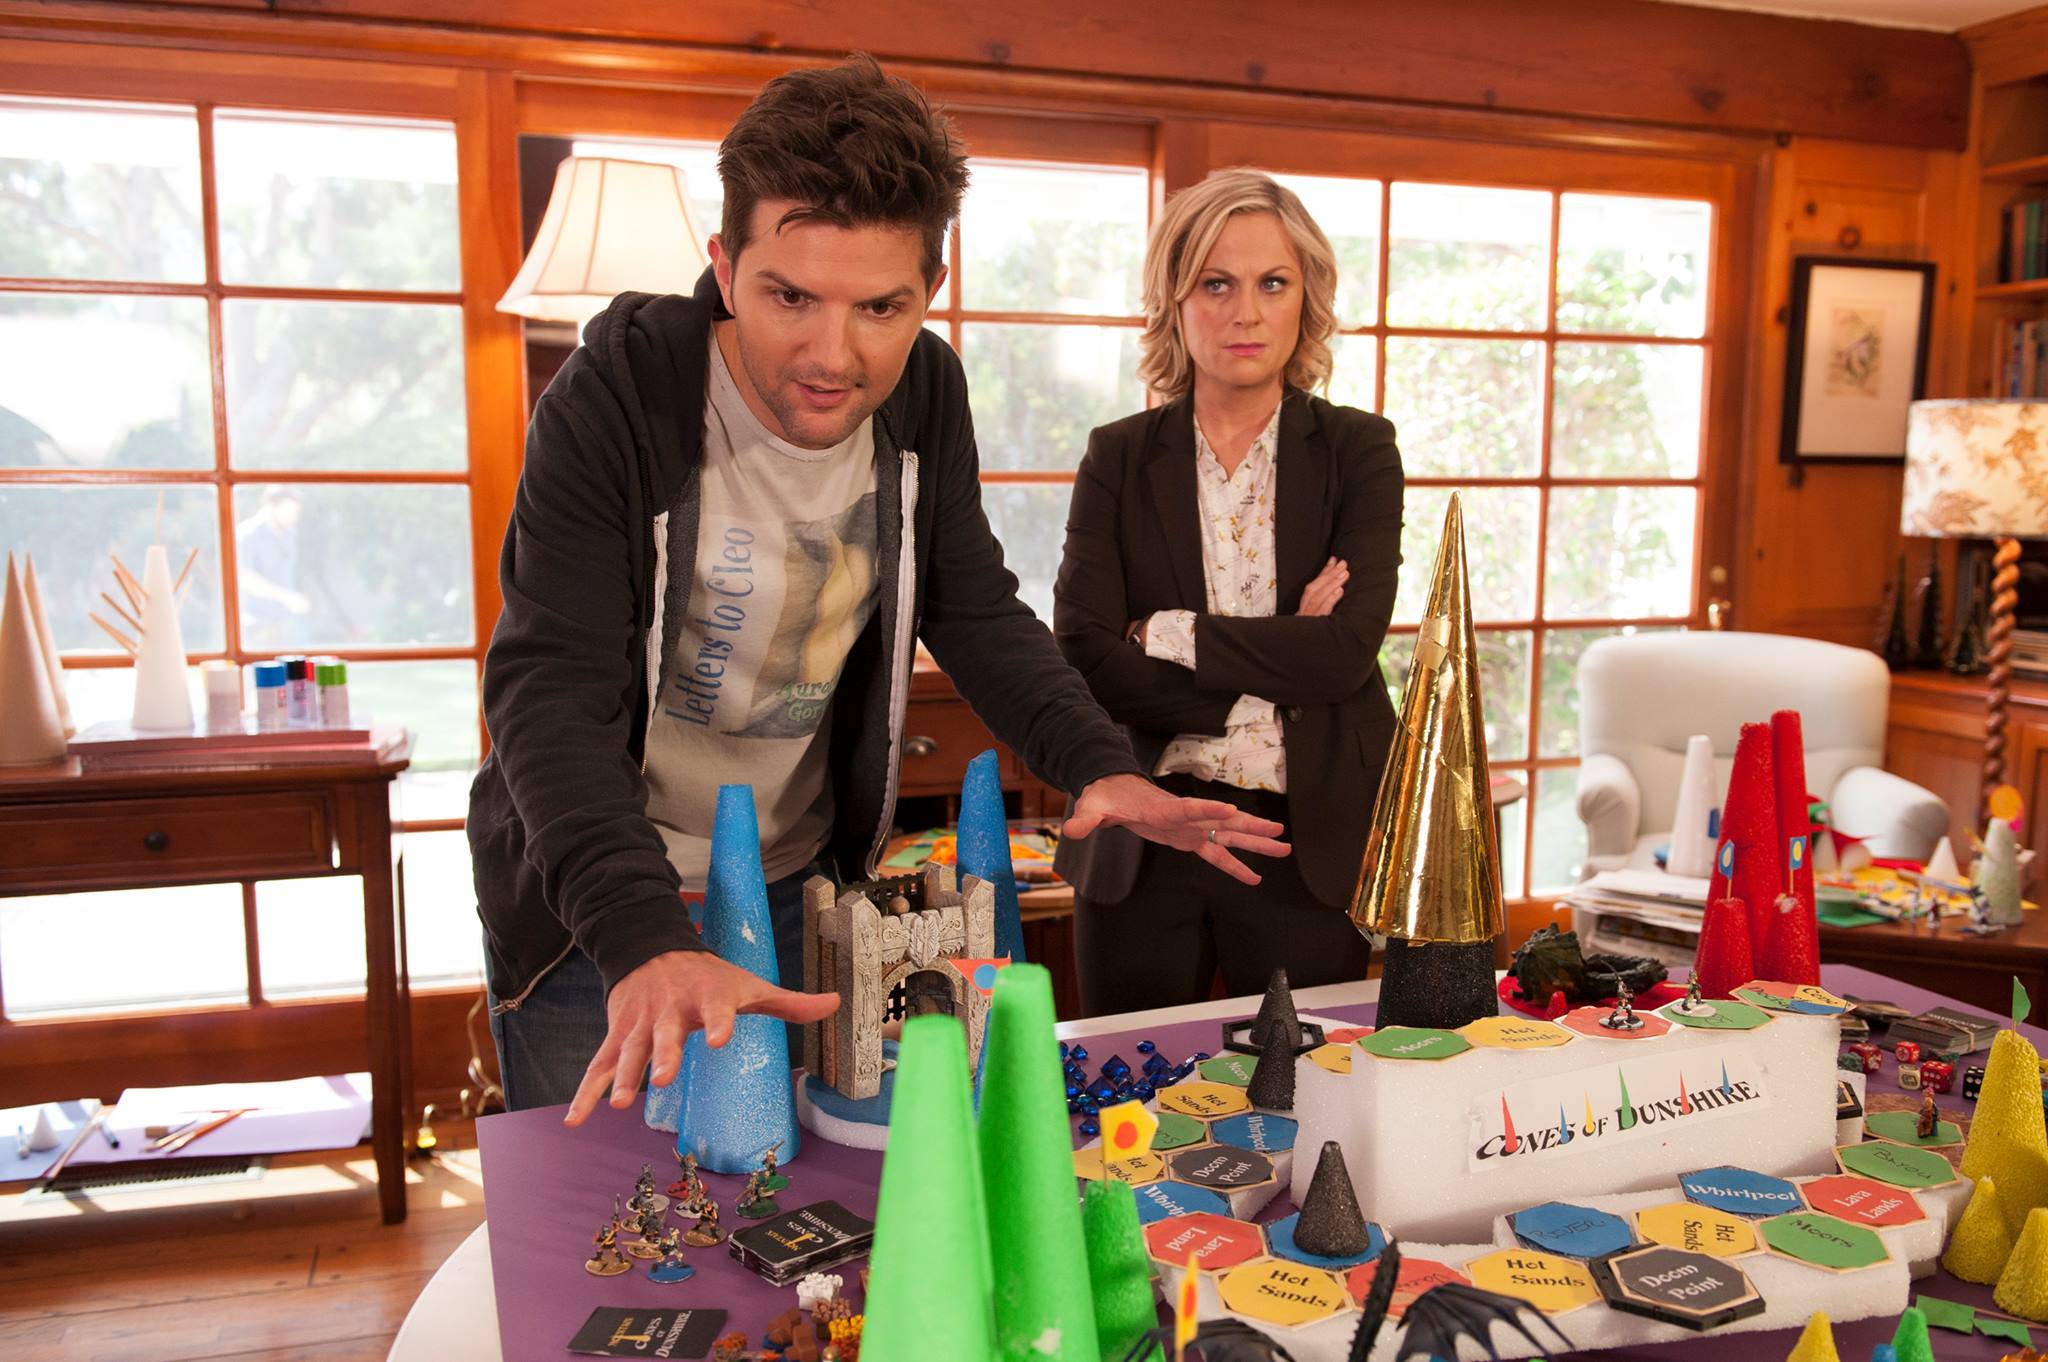 Parks and Recreation - 06x09 - The Cones of Dunshire